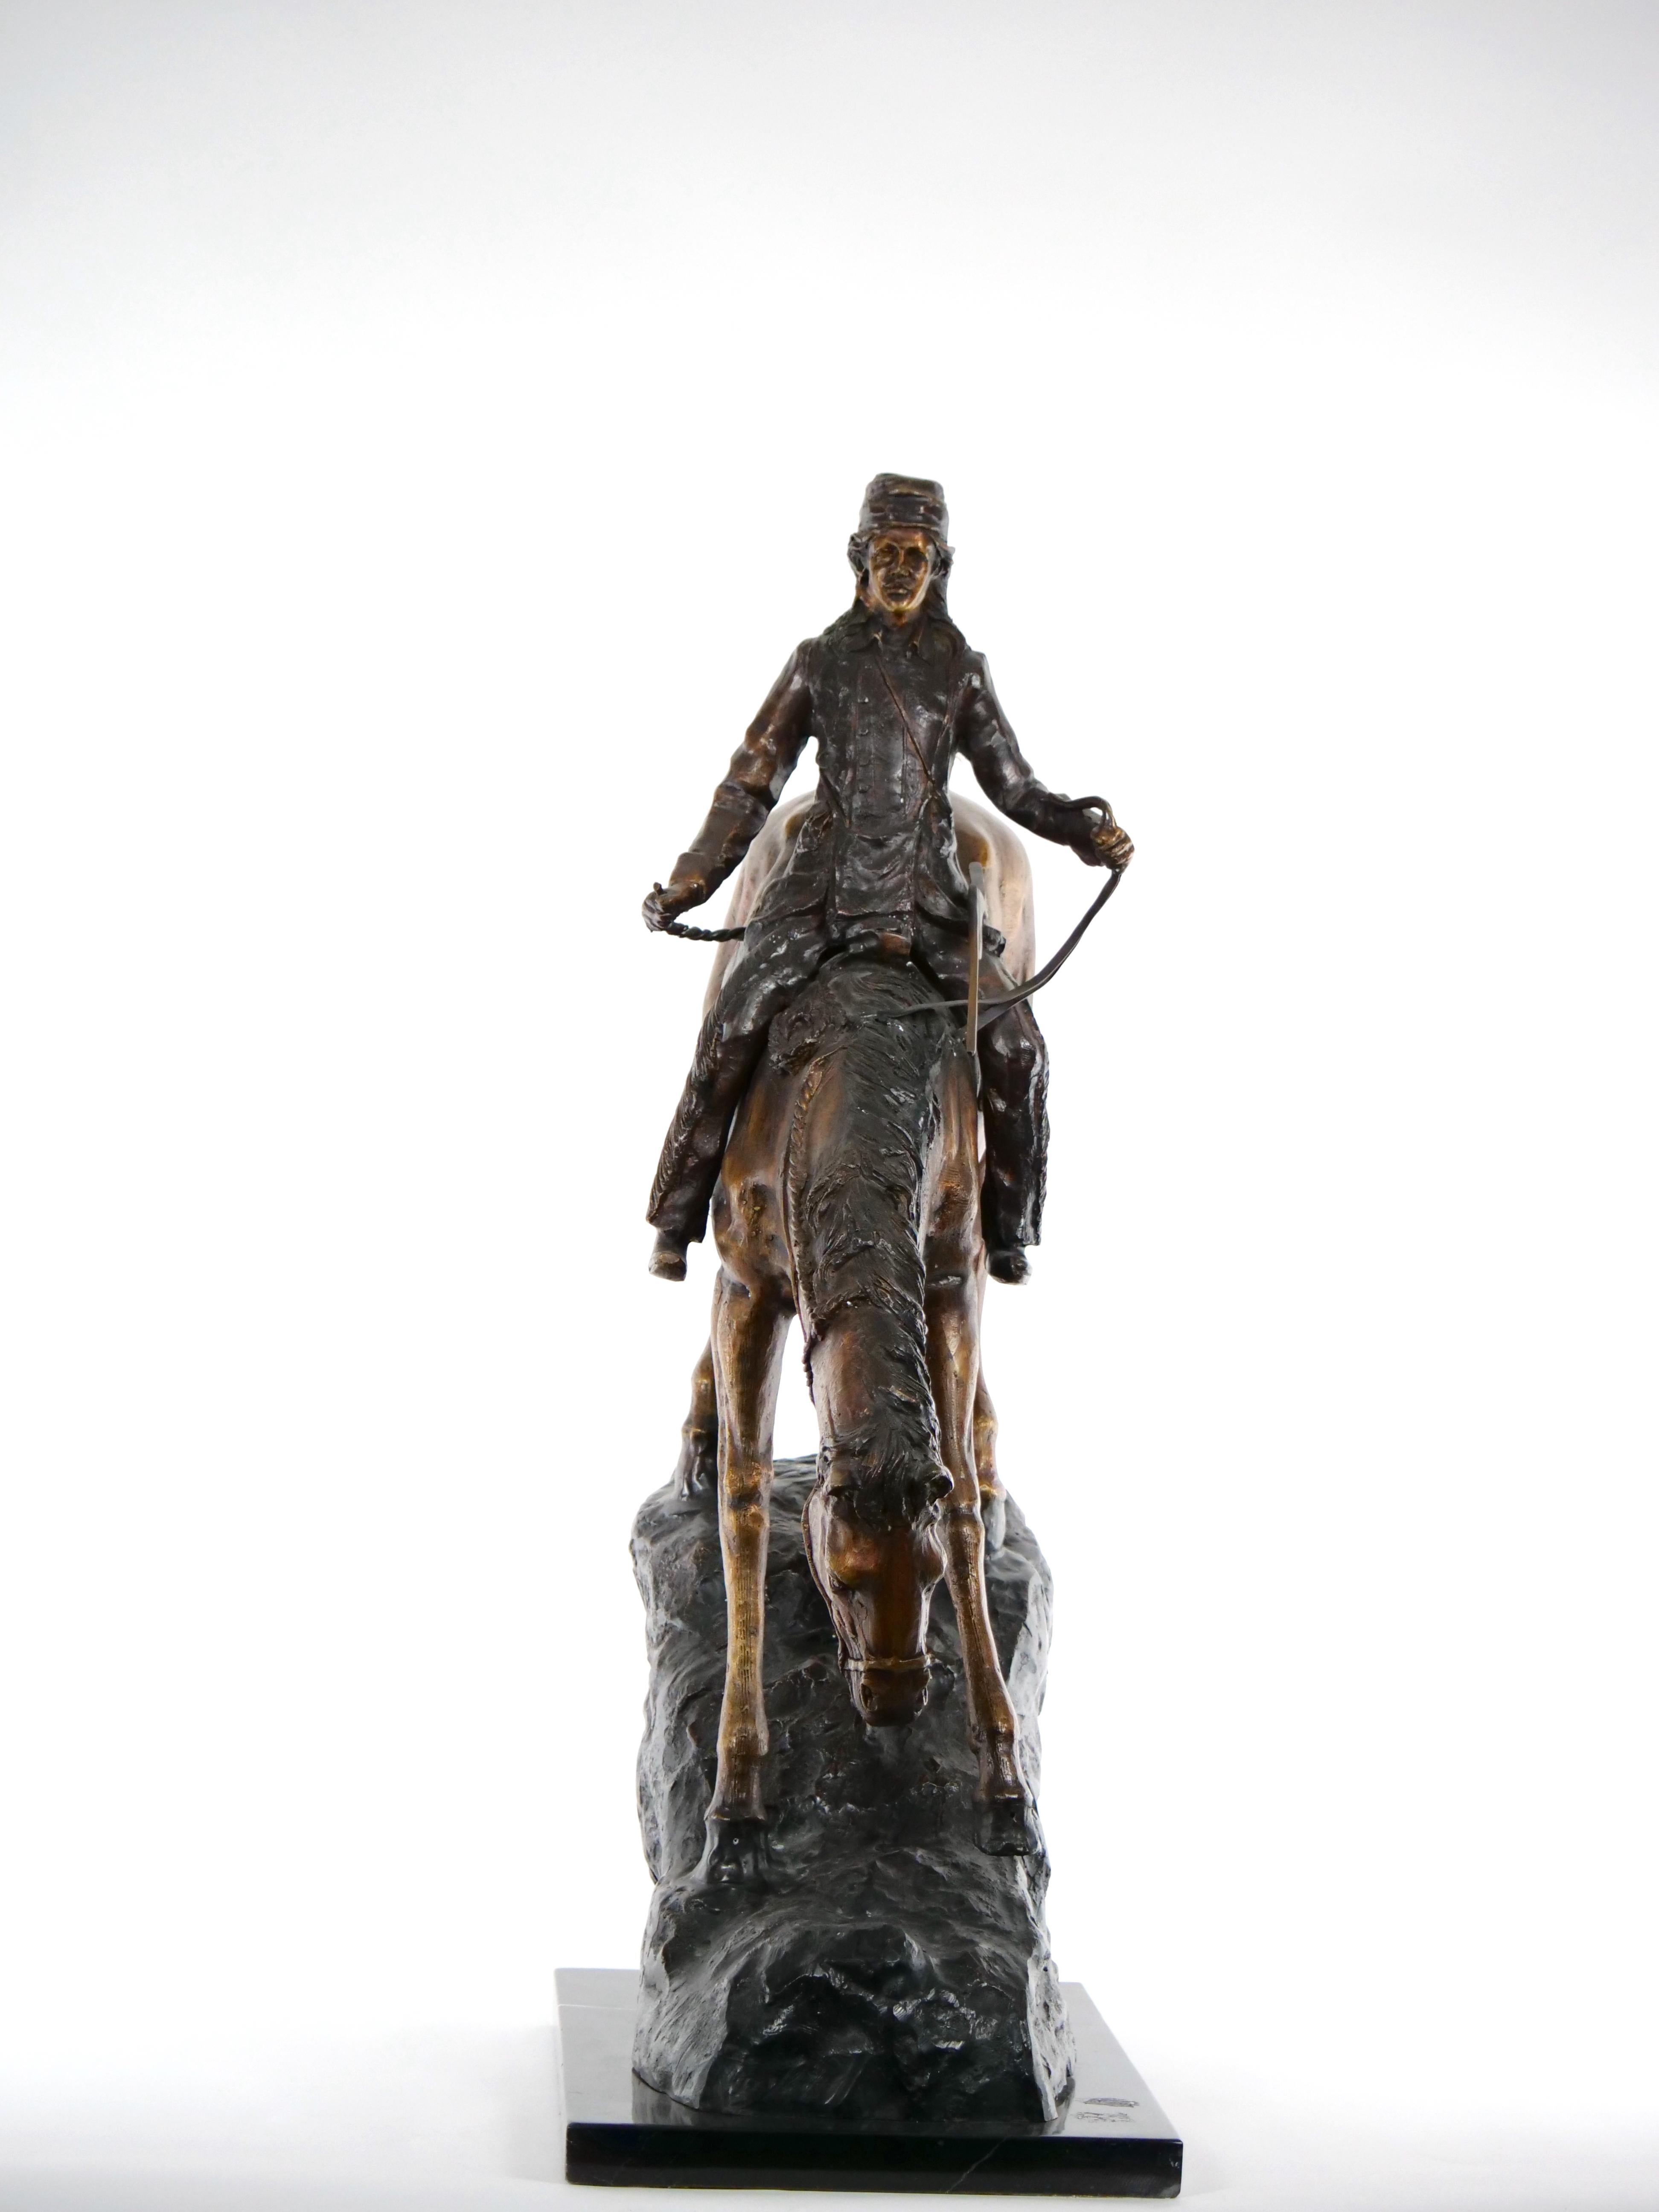 Heavy bronze and black rectangle marble base Frederic Remington 29 inches high bronze sculpture statue of the mountain man Native American Indian bronze Horse and black marble base. The sculpture features a large rectangle shape marble base, large